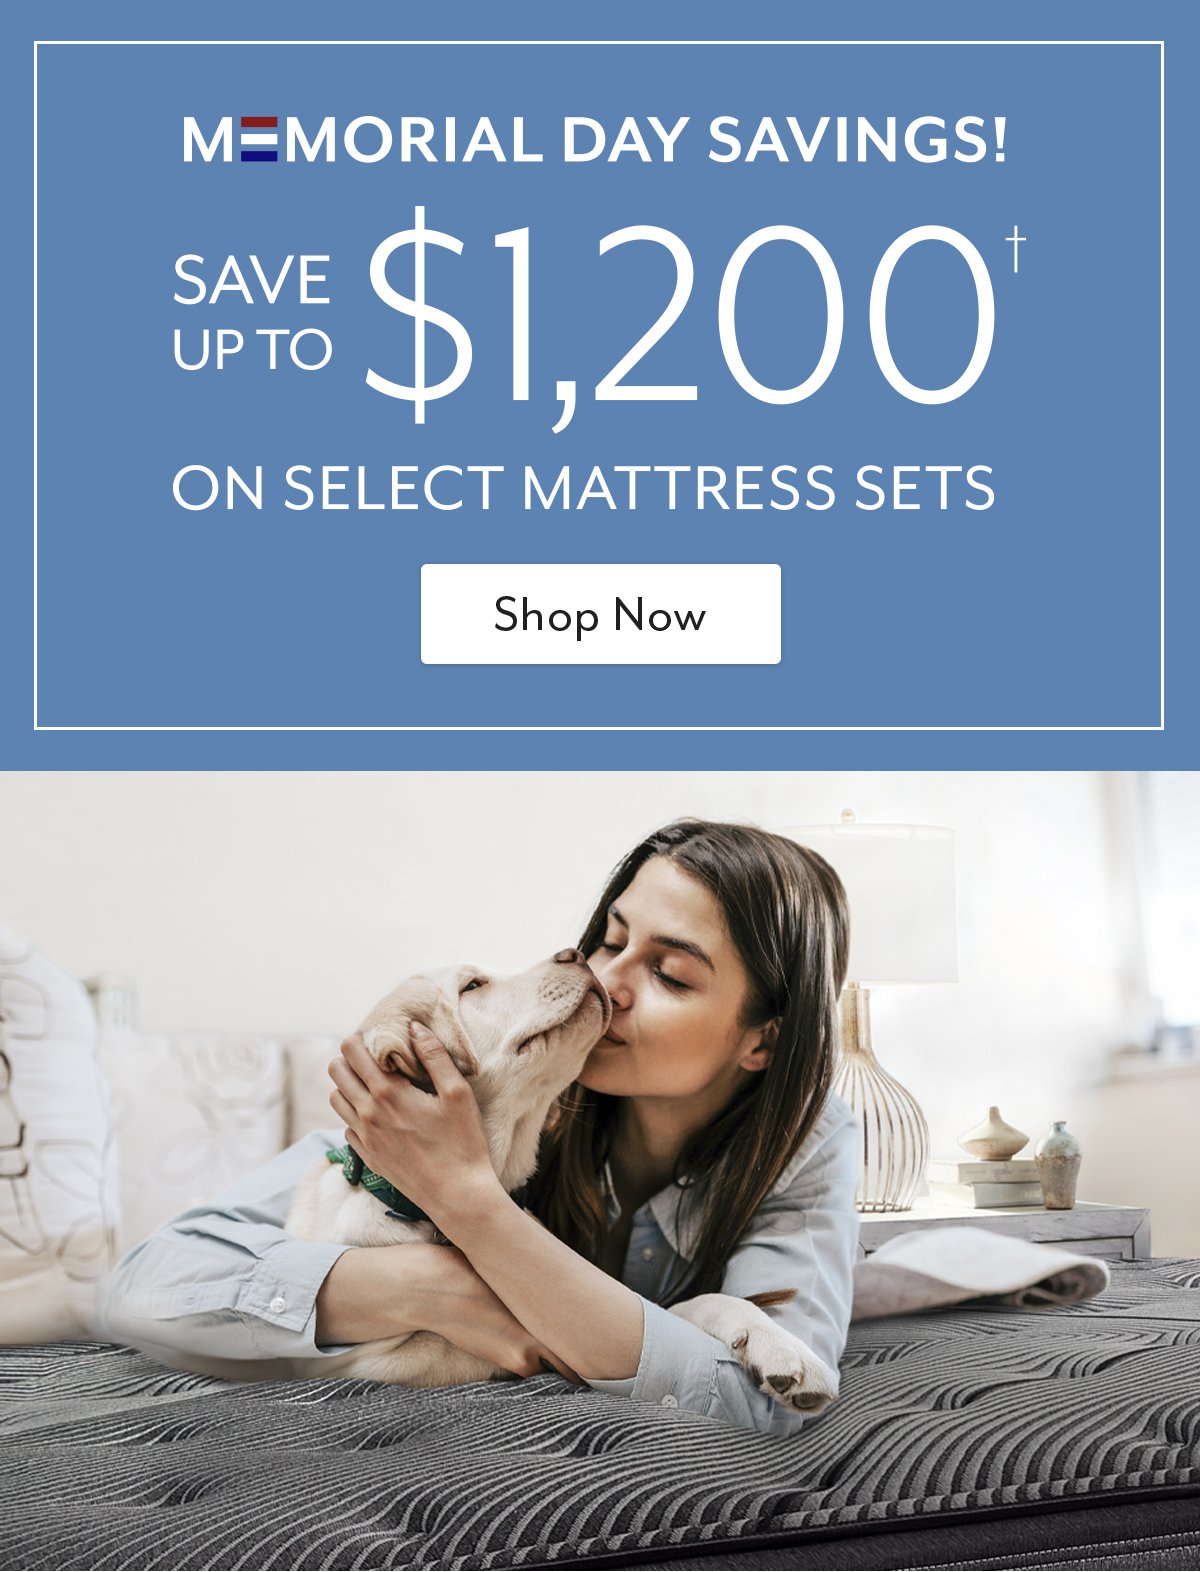 Save up to \\$1200 on select mattress sets!